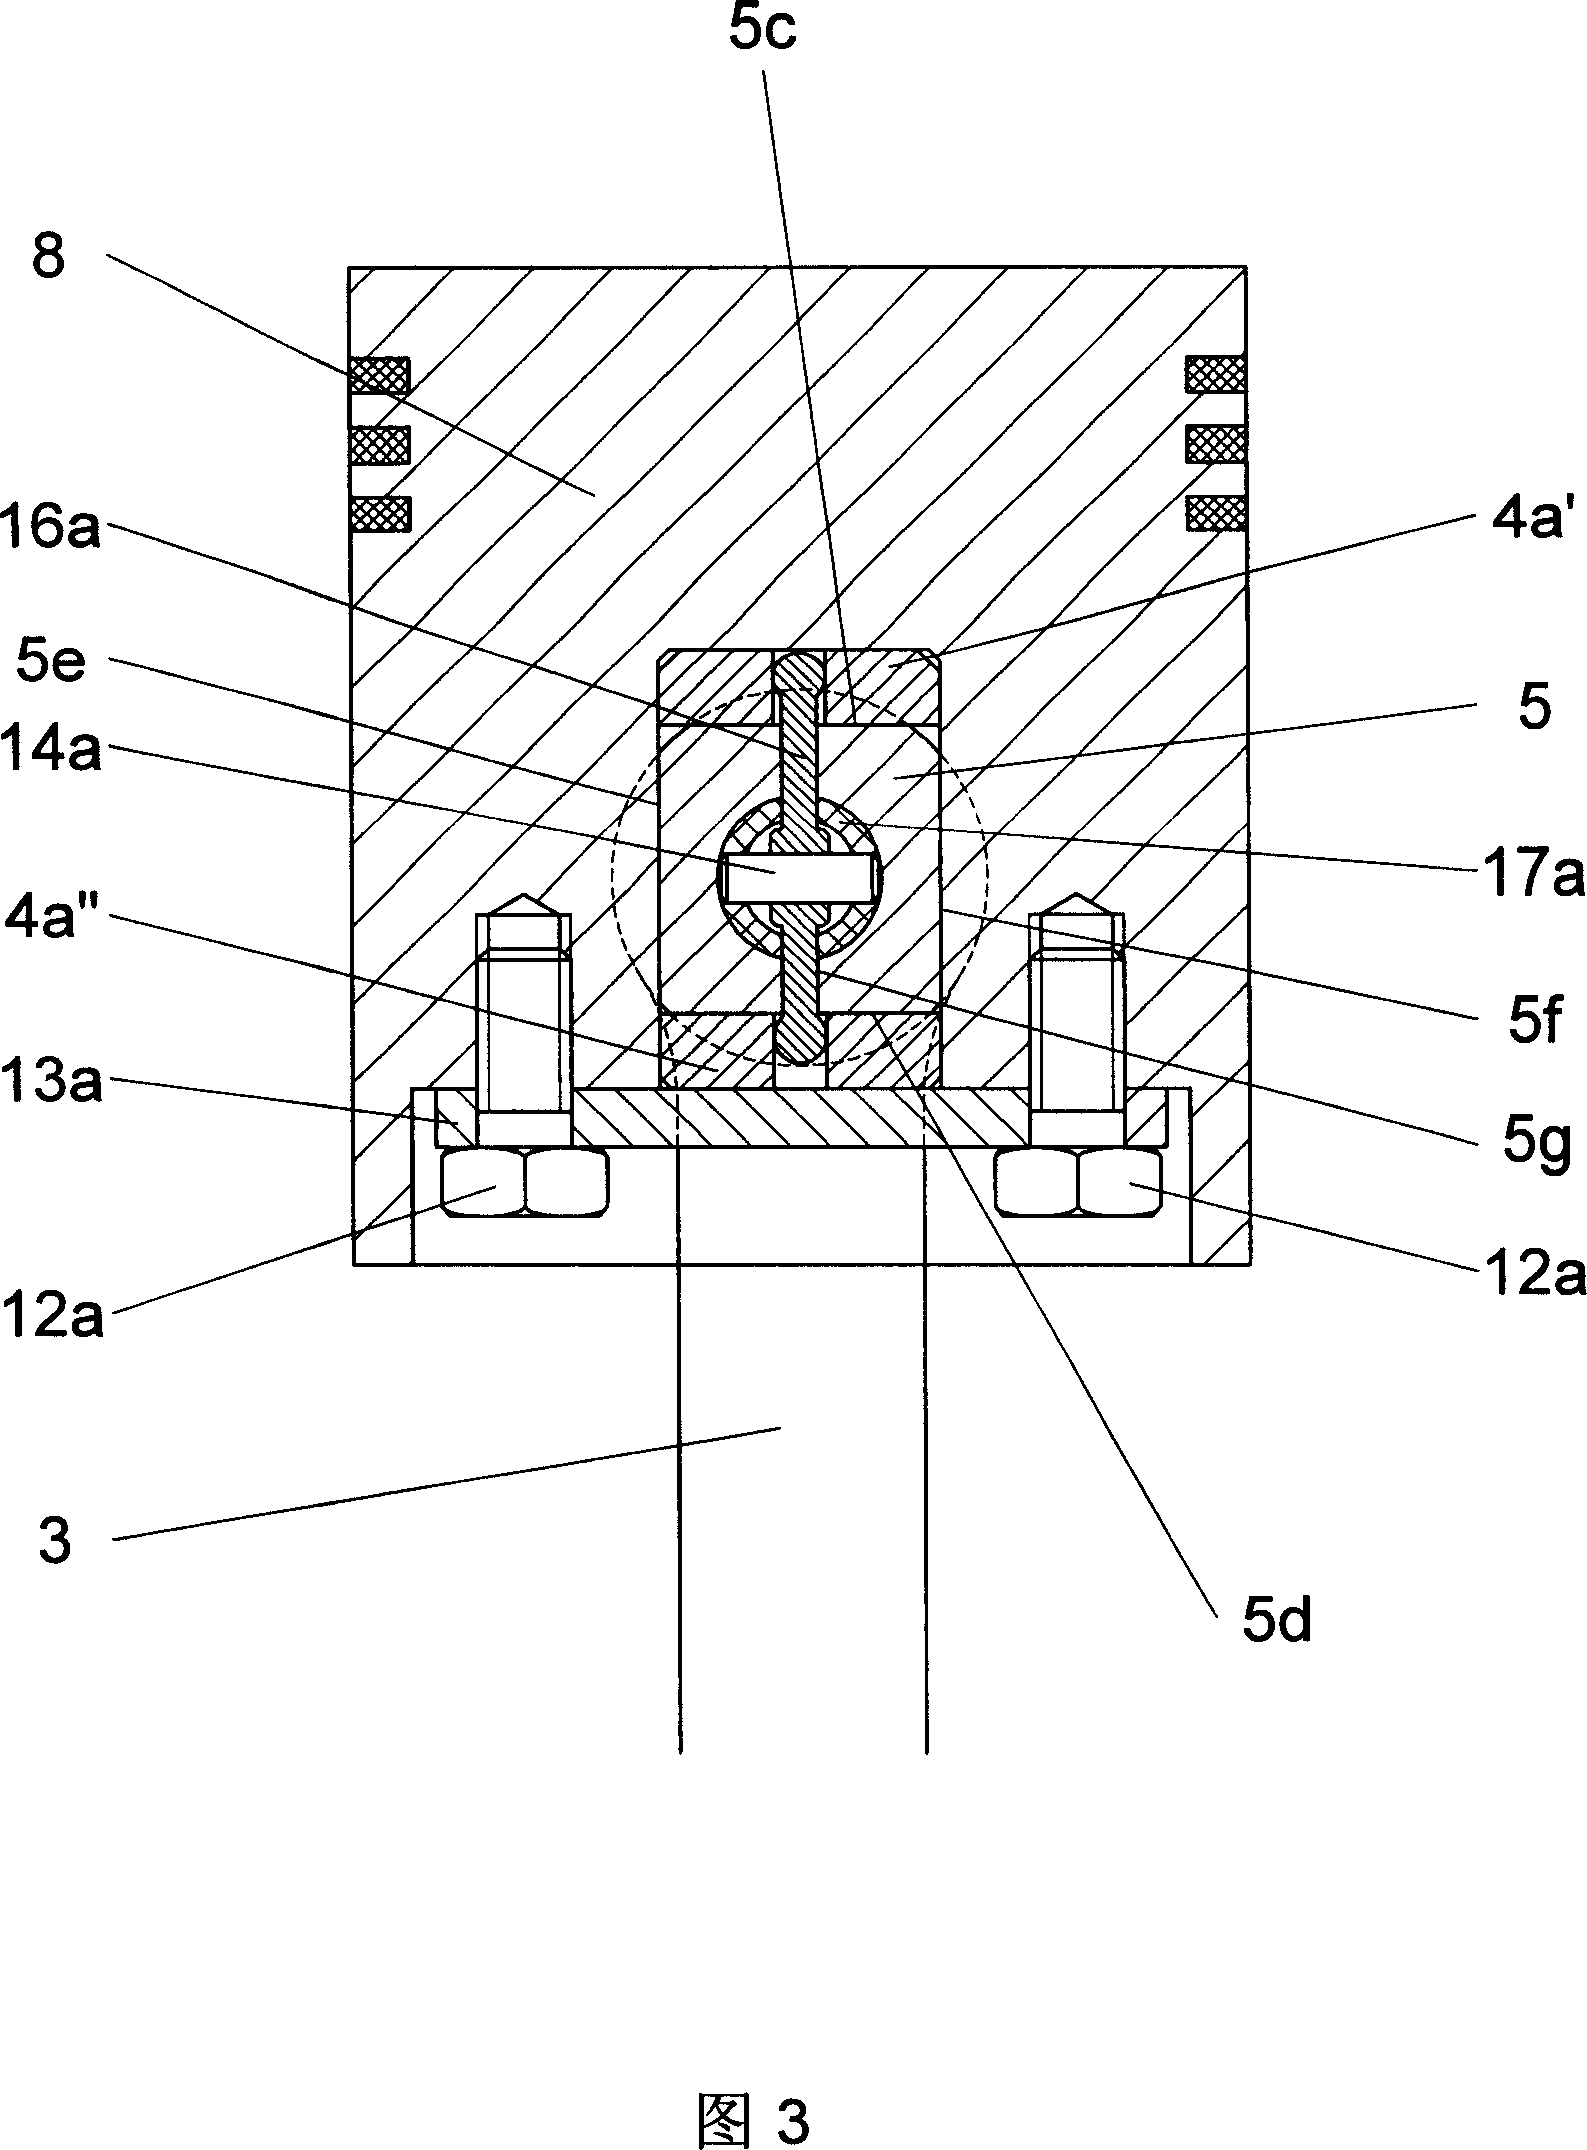 Variable compression ratio device of piston reciprocating internal combustion engine